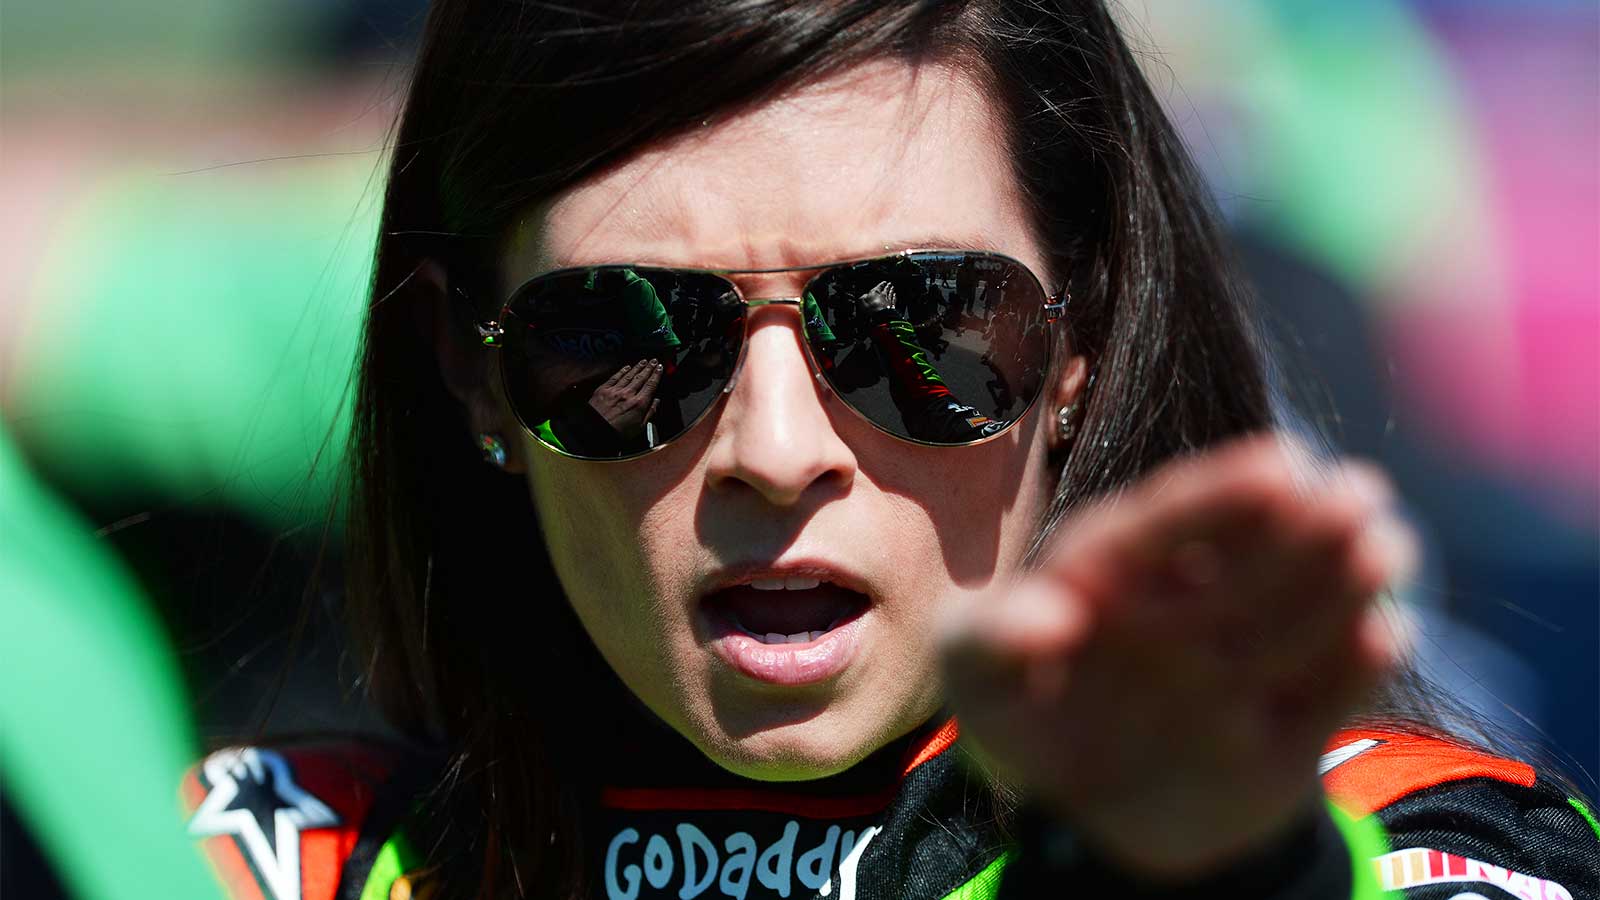 What a difference a year makes: Danica has rough start at DIS